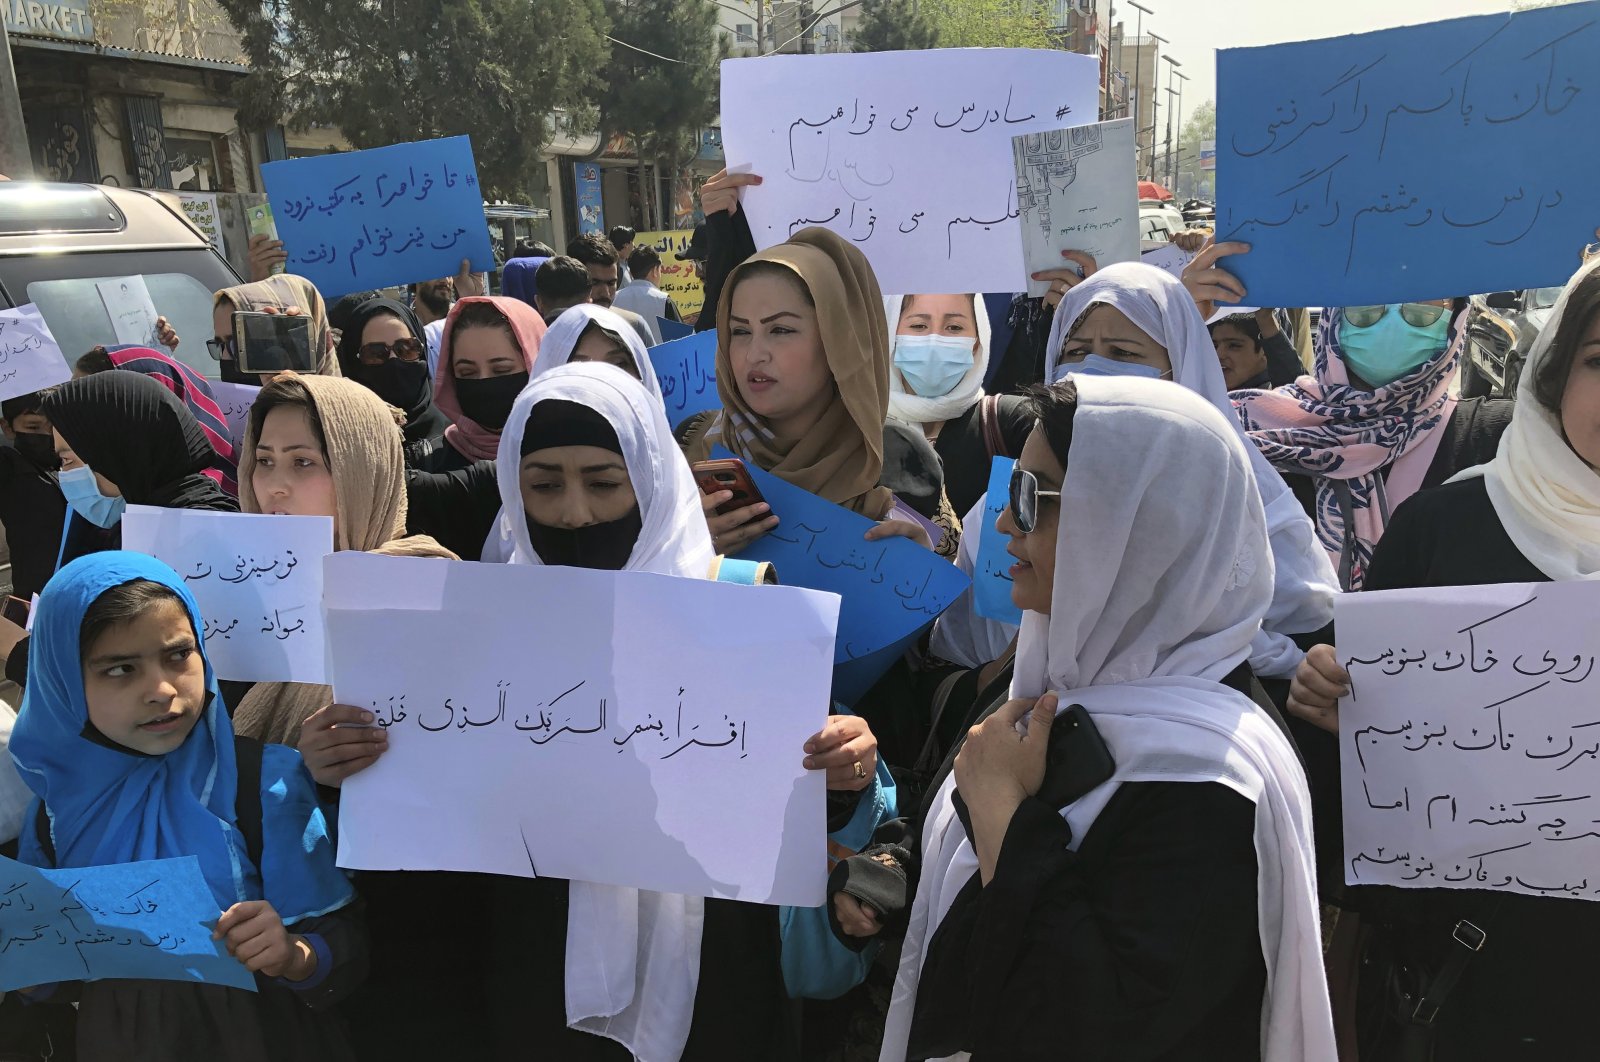 Afghan women chant and hold signs of protest during a demonstration in Kabul, Afghanistan, Saturday, March 26, 2022. (AP Photo)